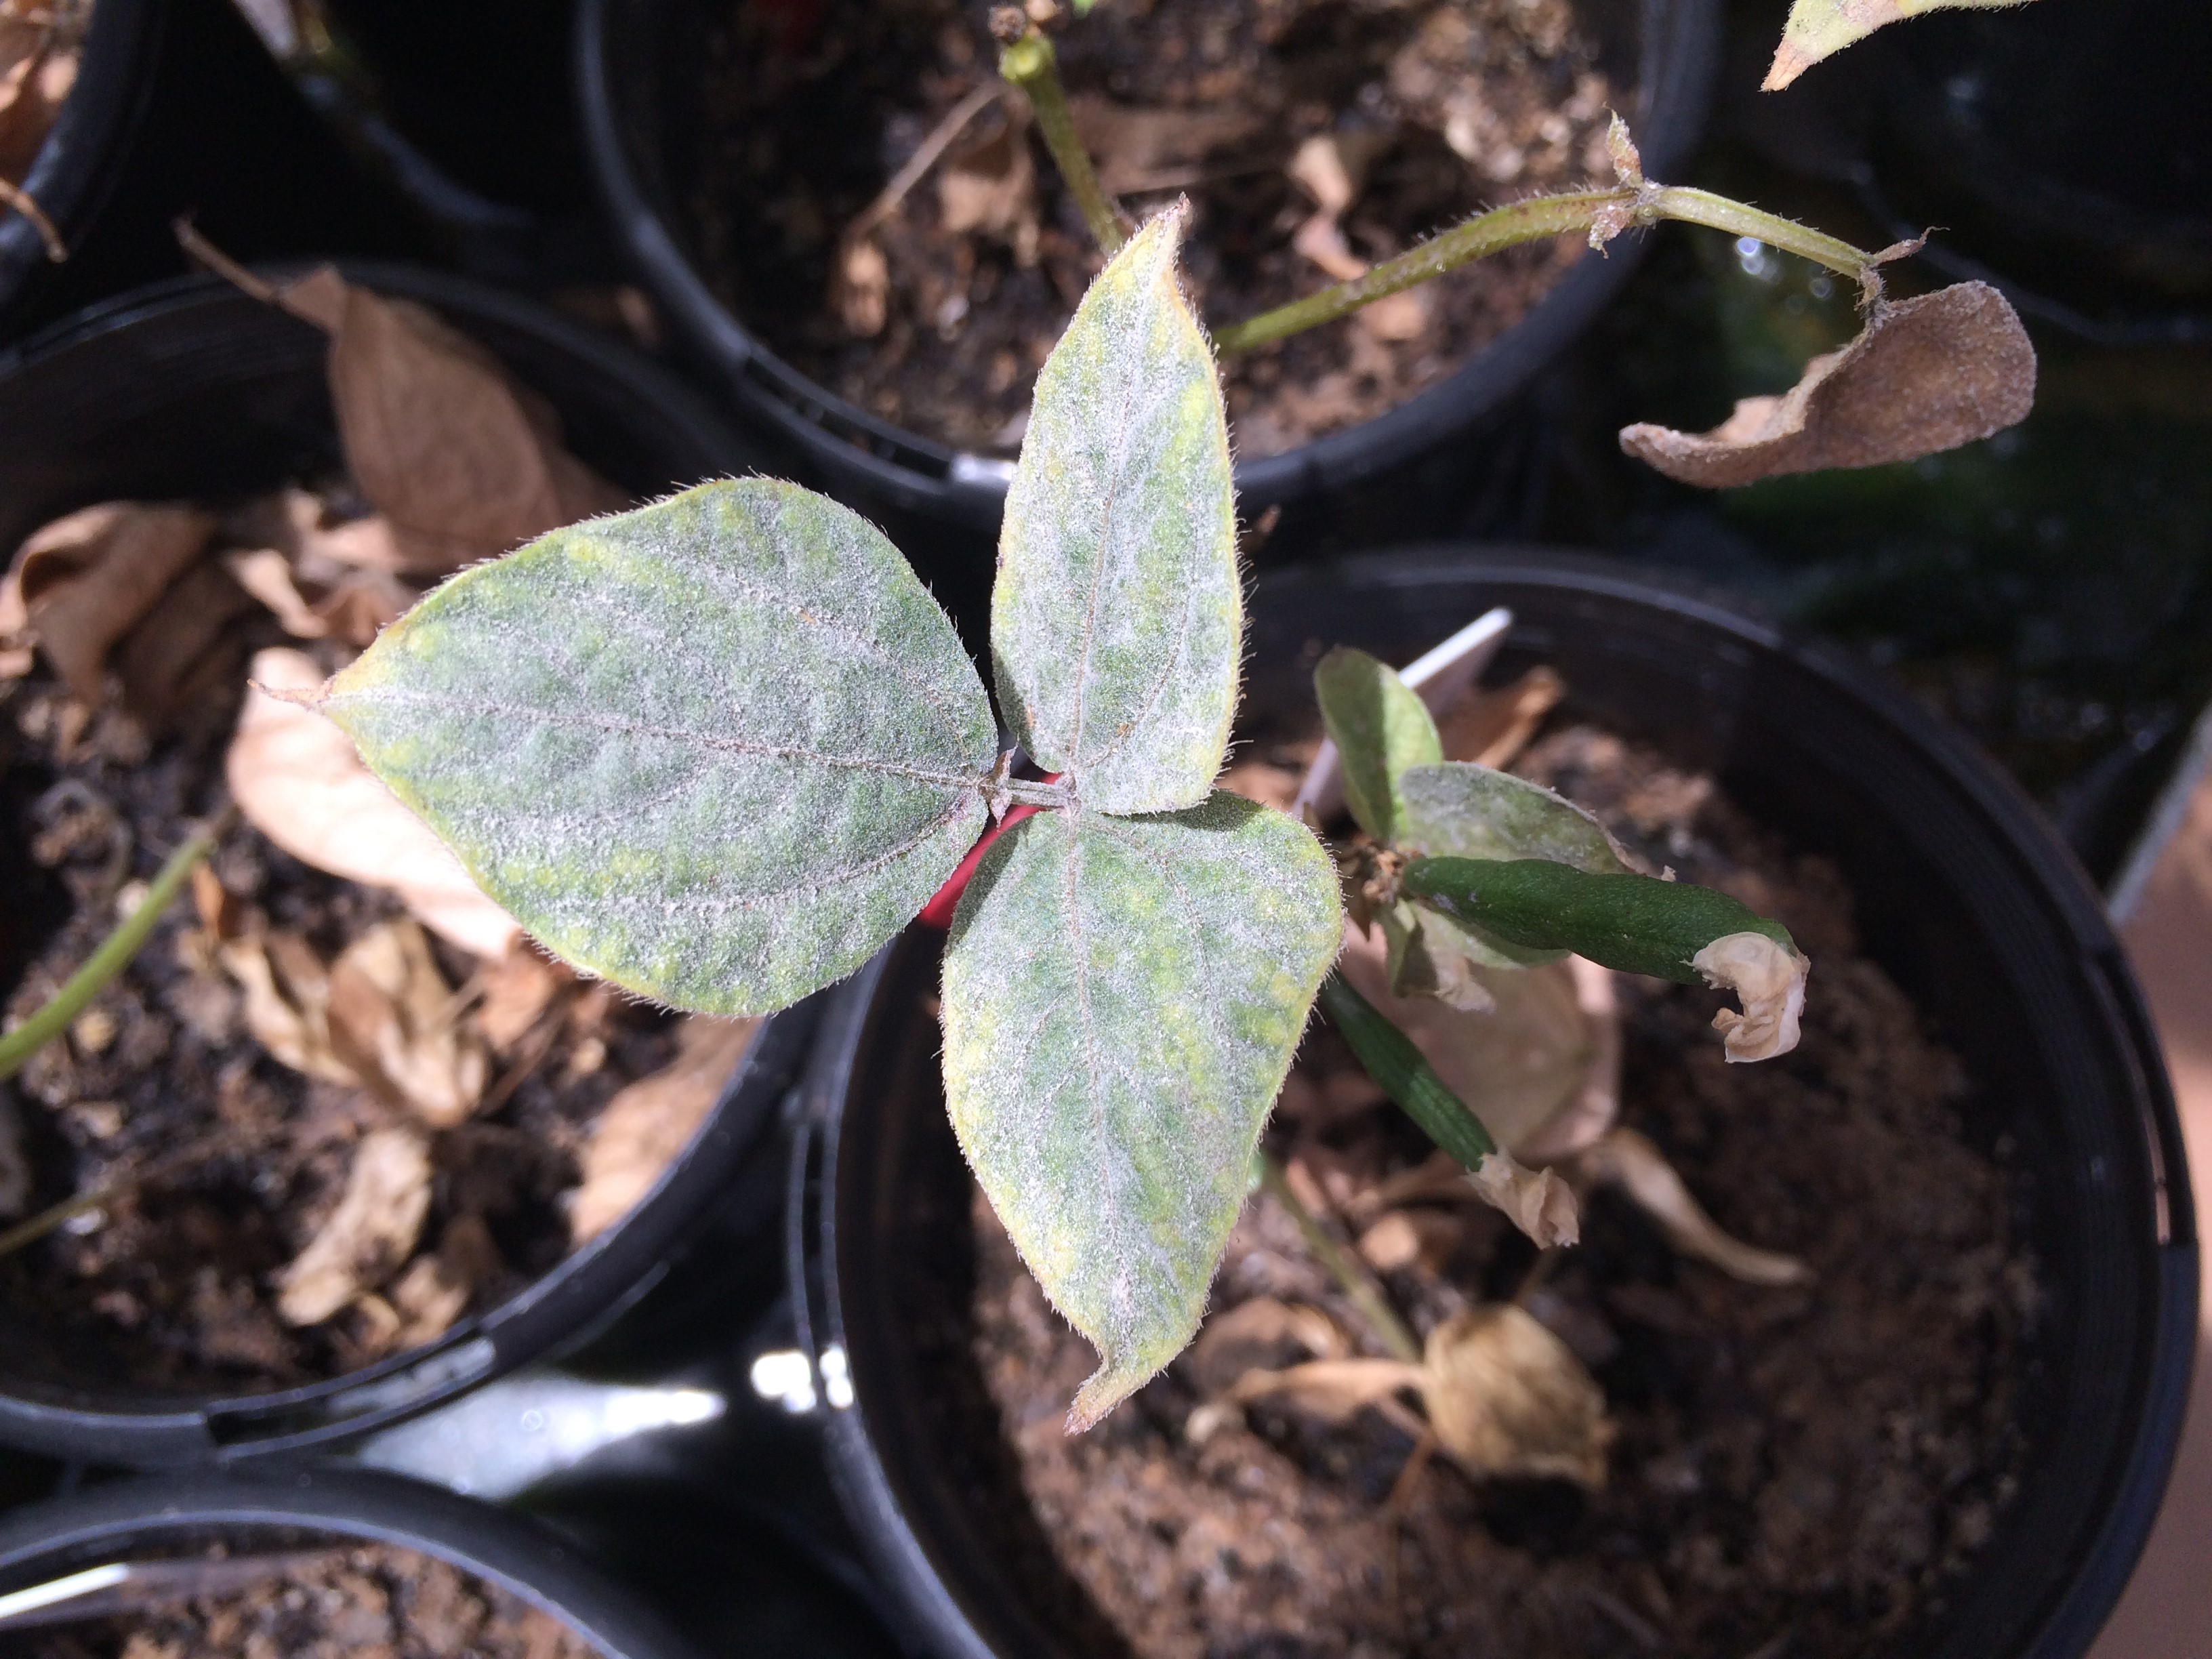 This photo shows white fungal growth on leaves caused by the mungbean powdery mildew pathogen.